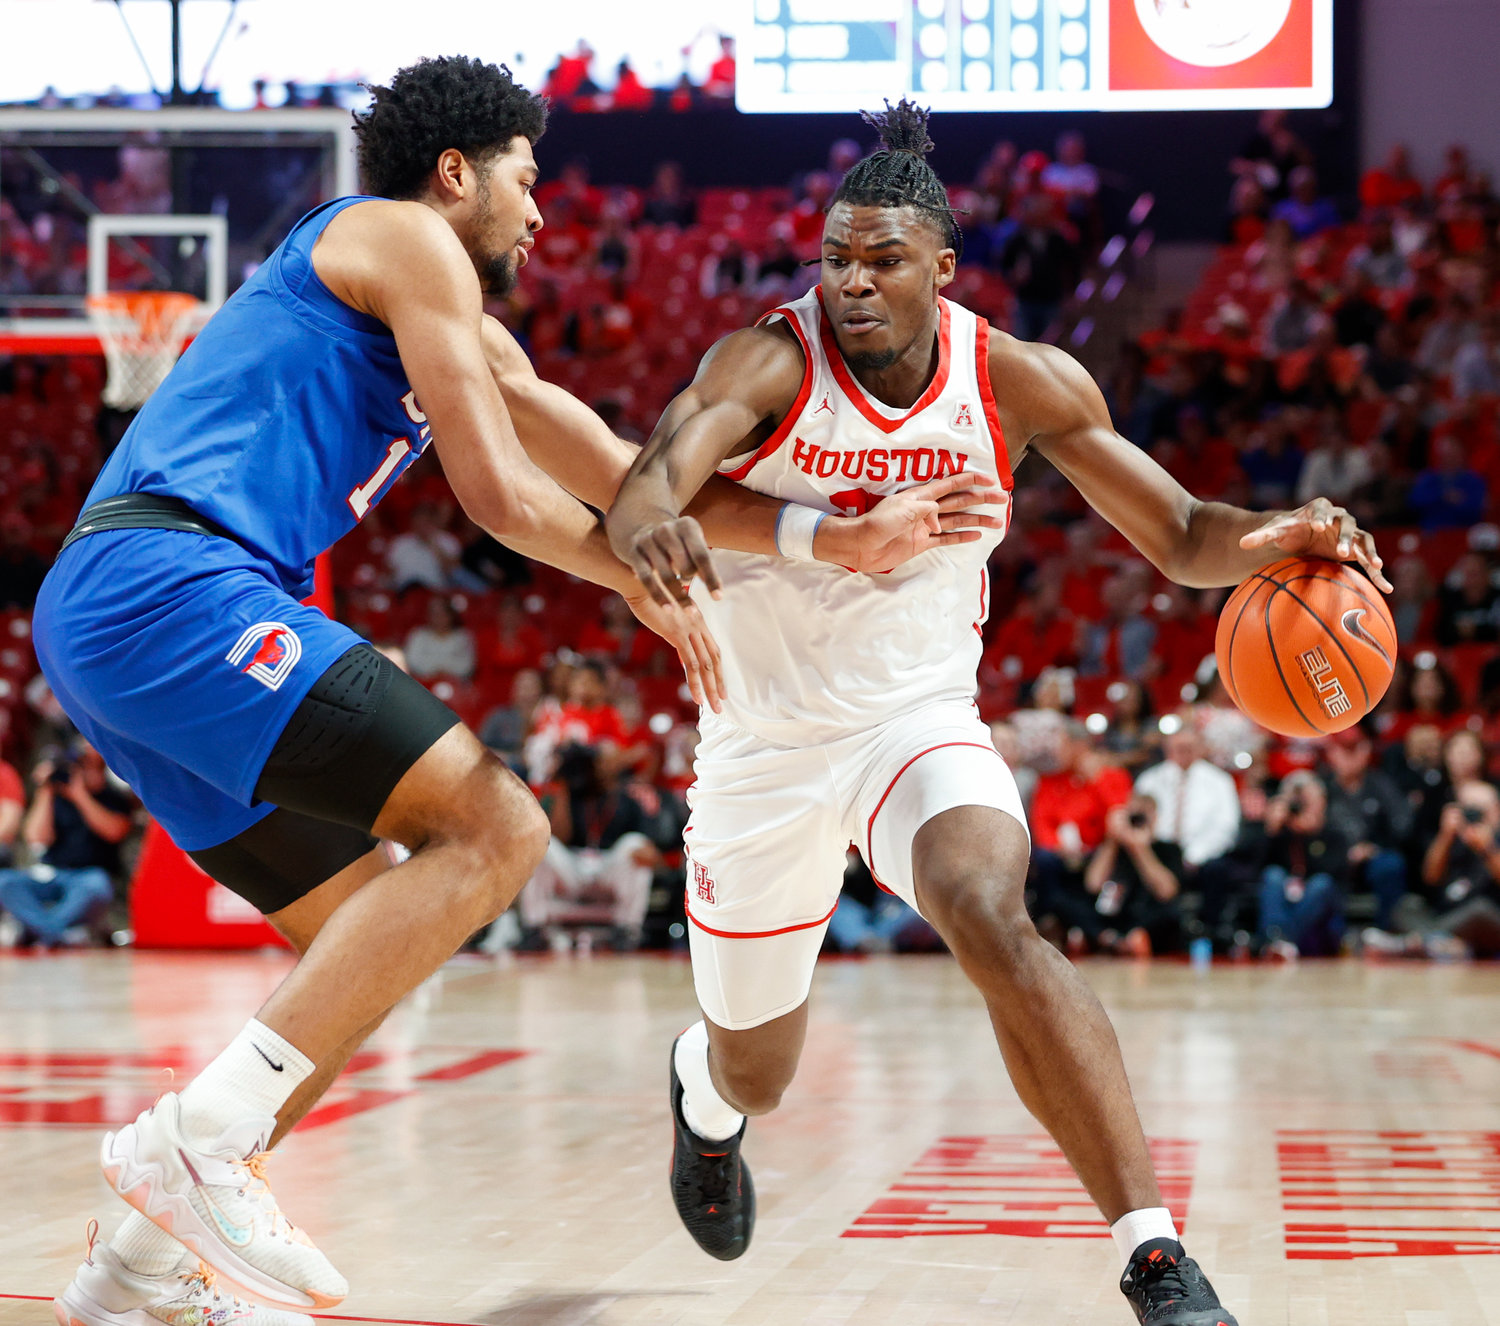 Houston forward Jarace Walker (25) moves the ball against SMU center Mo Njie (13) during an NCAA men’s basketball game between the Houston Cougars and the Southern Methodist Mustangs on Jan. 5, 2023 in Houston. Houston won, 87-53,